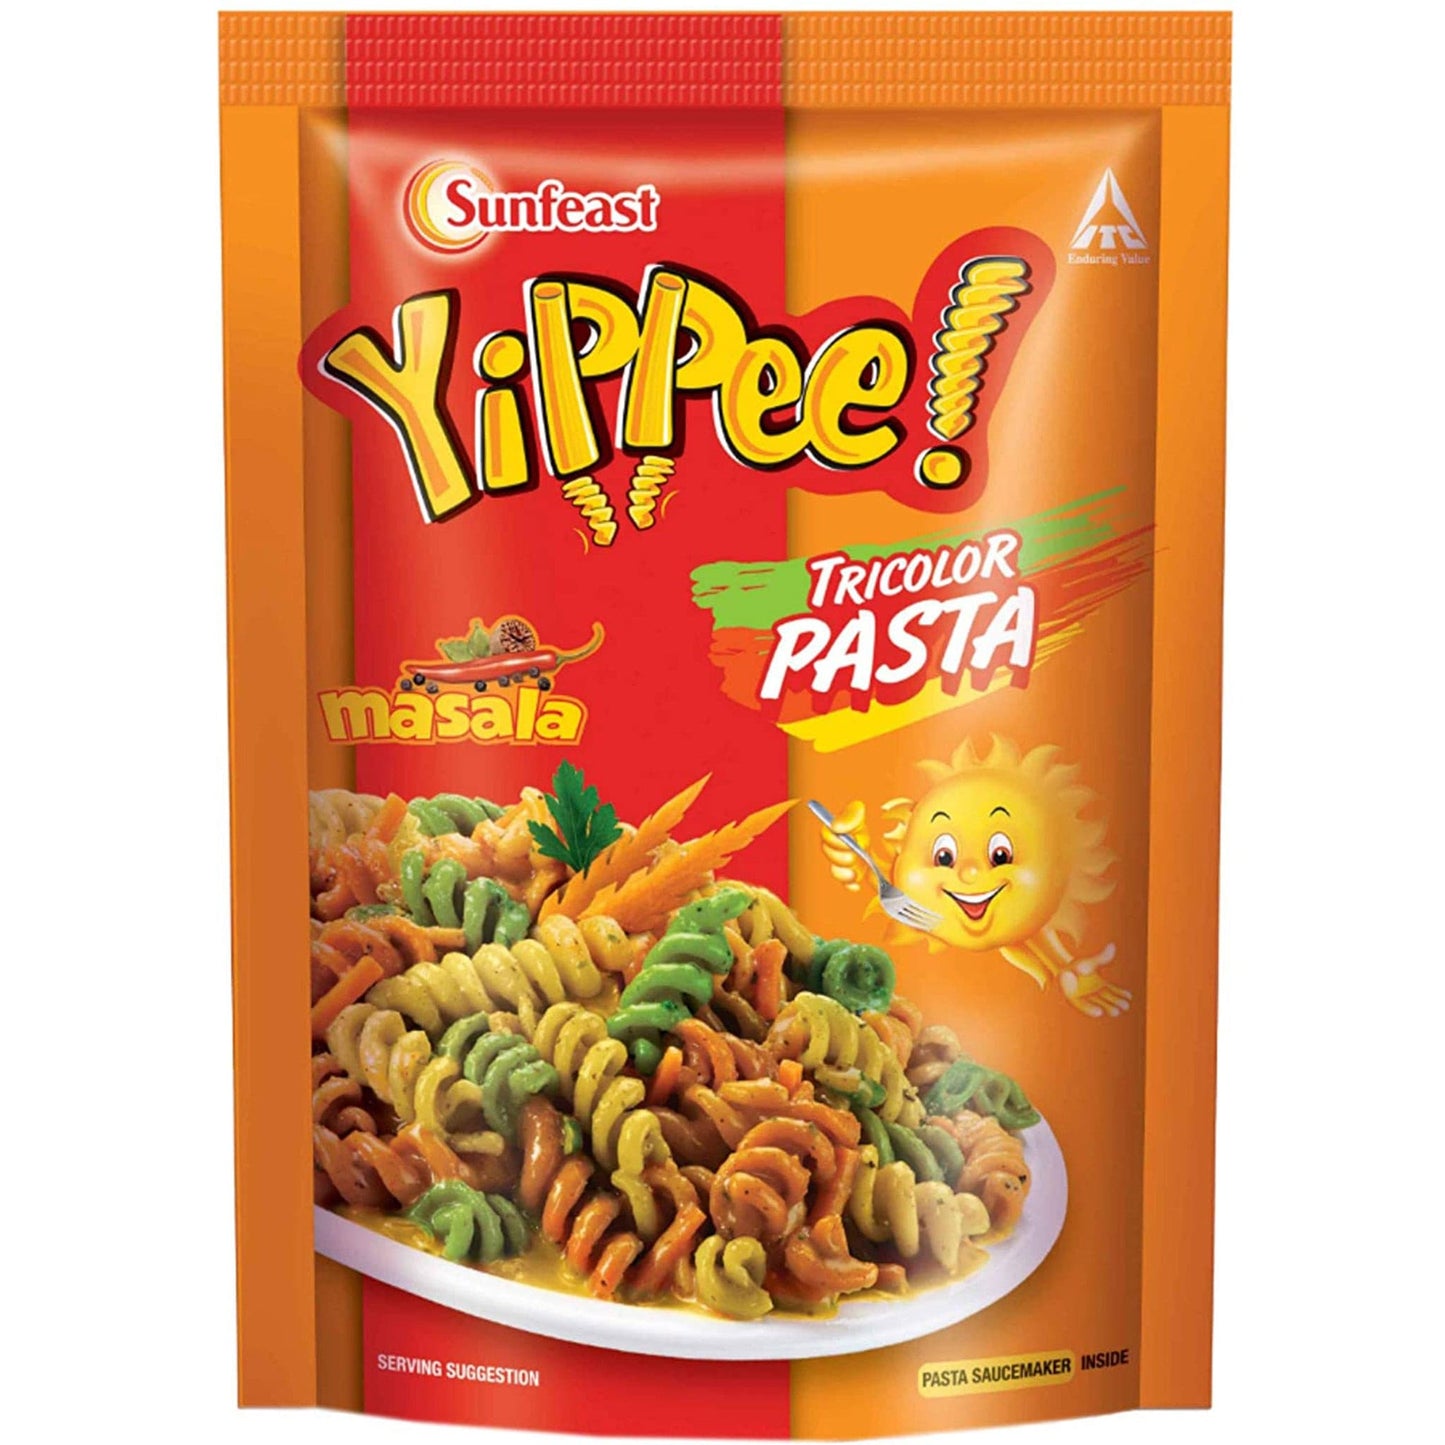 Yippee Tri Color Pasta (7036974792891)